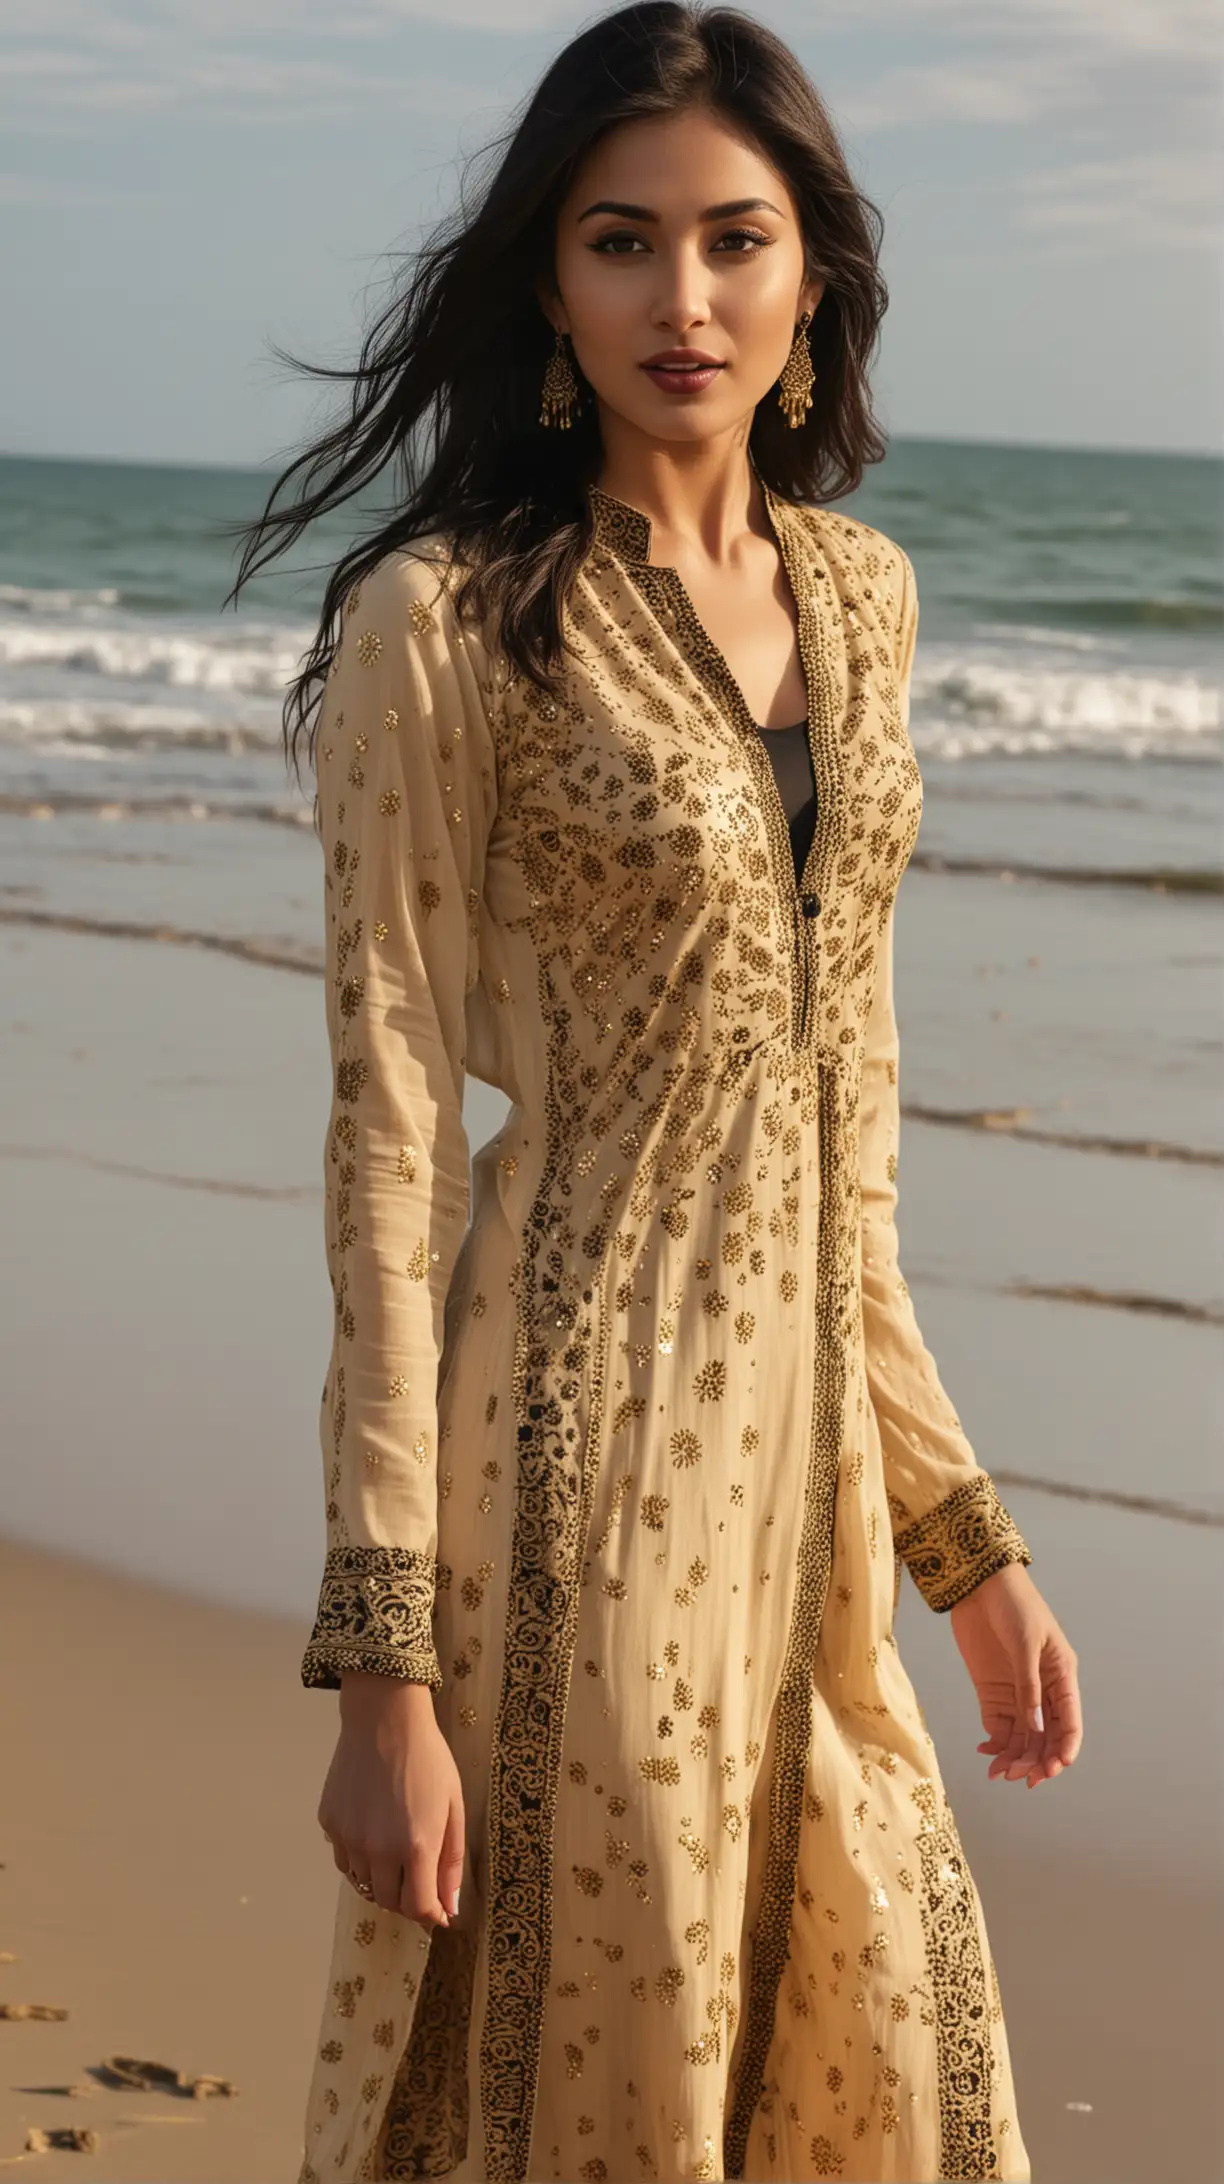 Very stunning, beautiful and sexy 25 year old British girl sensually wearing Beige, Gold and black Indian salwaar kameez, looking slightly japanese, black hair, maroon lipstick, dancing in front of beach in England, vivid colours, 4k, photo realistic, only upper-body and face shown